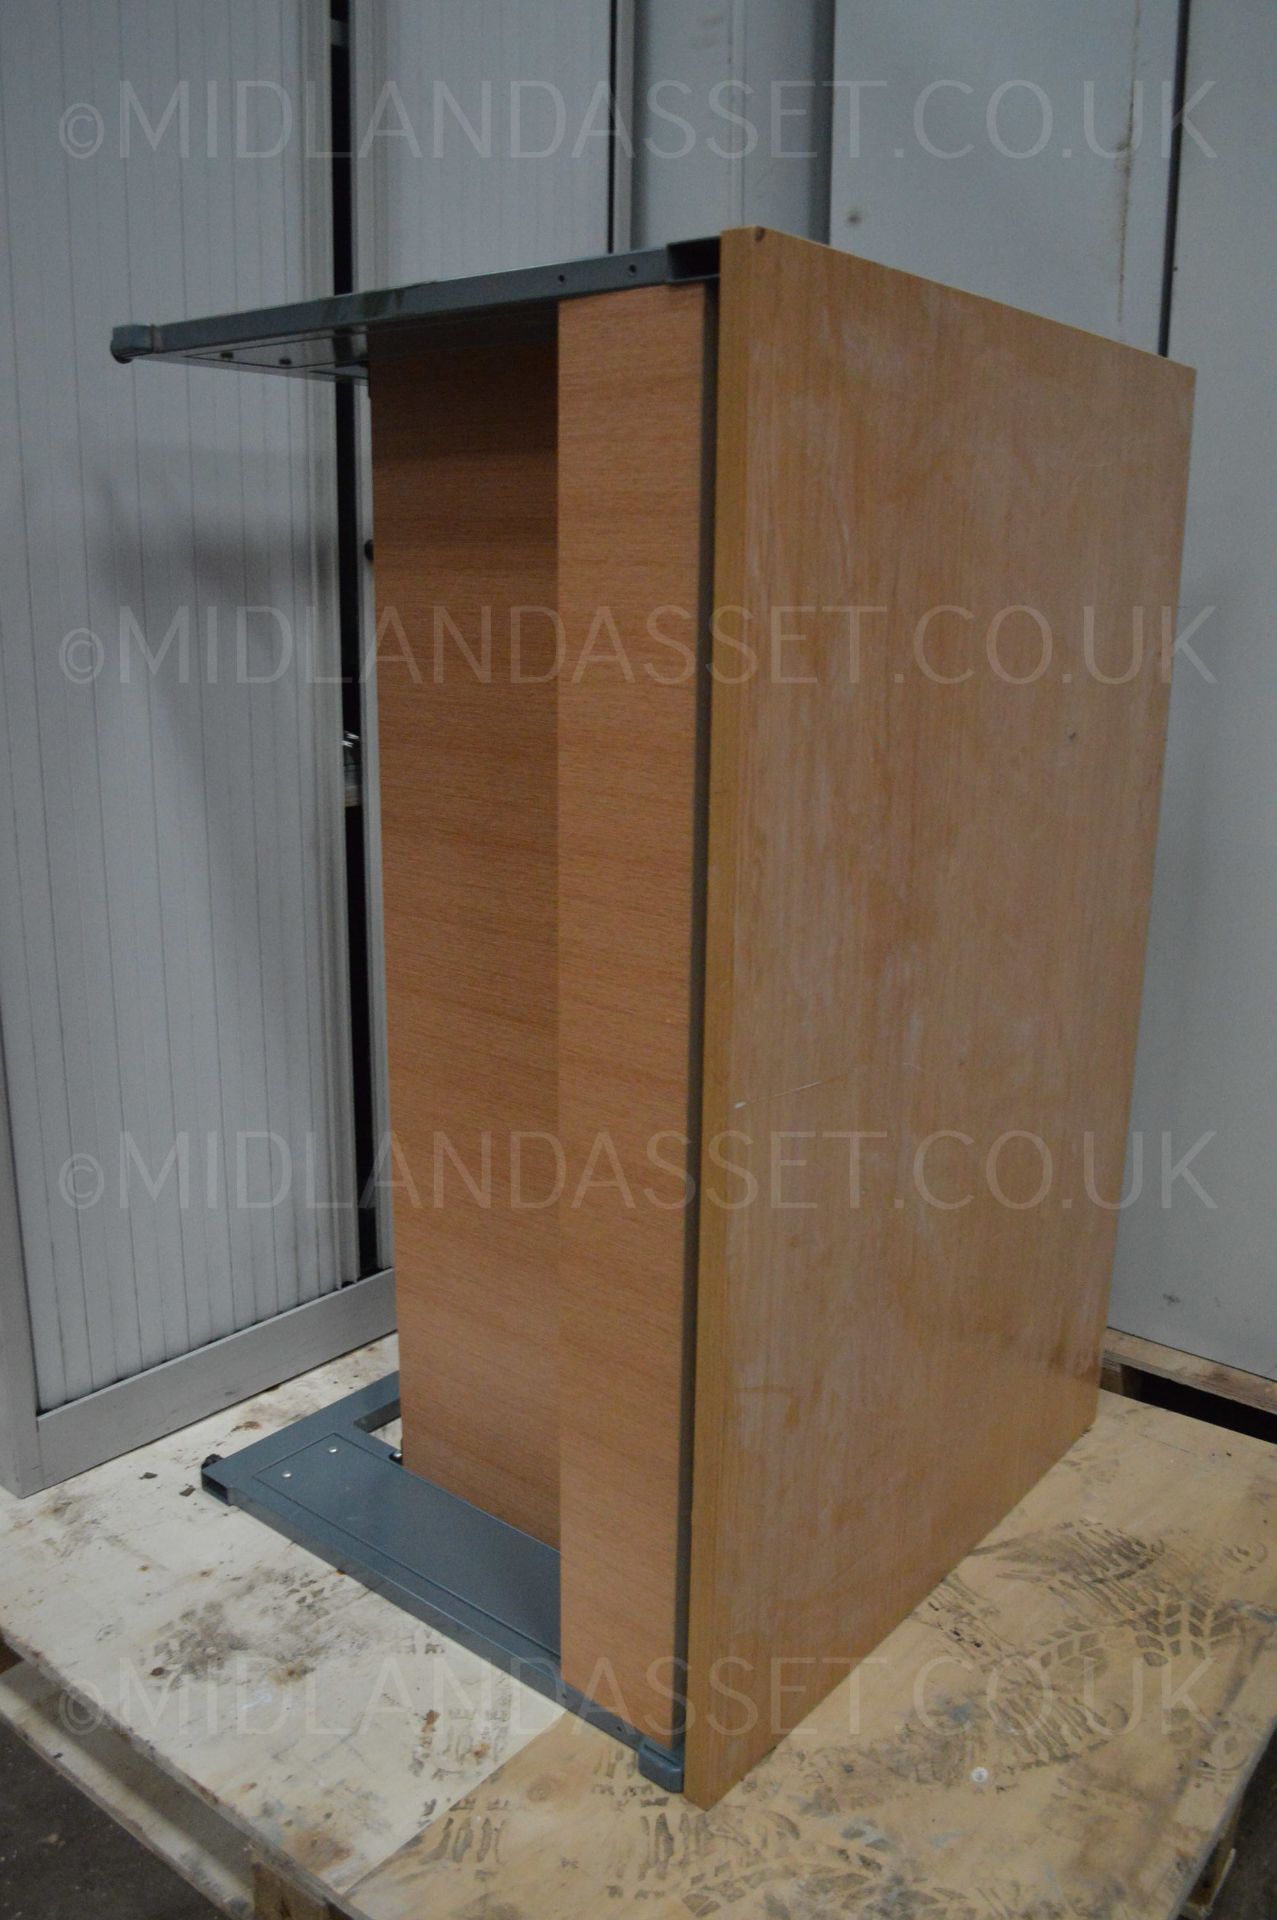 RECTANGULAR CANTILEVER DESK AND A FREE DRAW!!! - USED CONDITION (PEN MARKS ETC) OAK OFFICE DRAWERS - Image 2 of 6